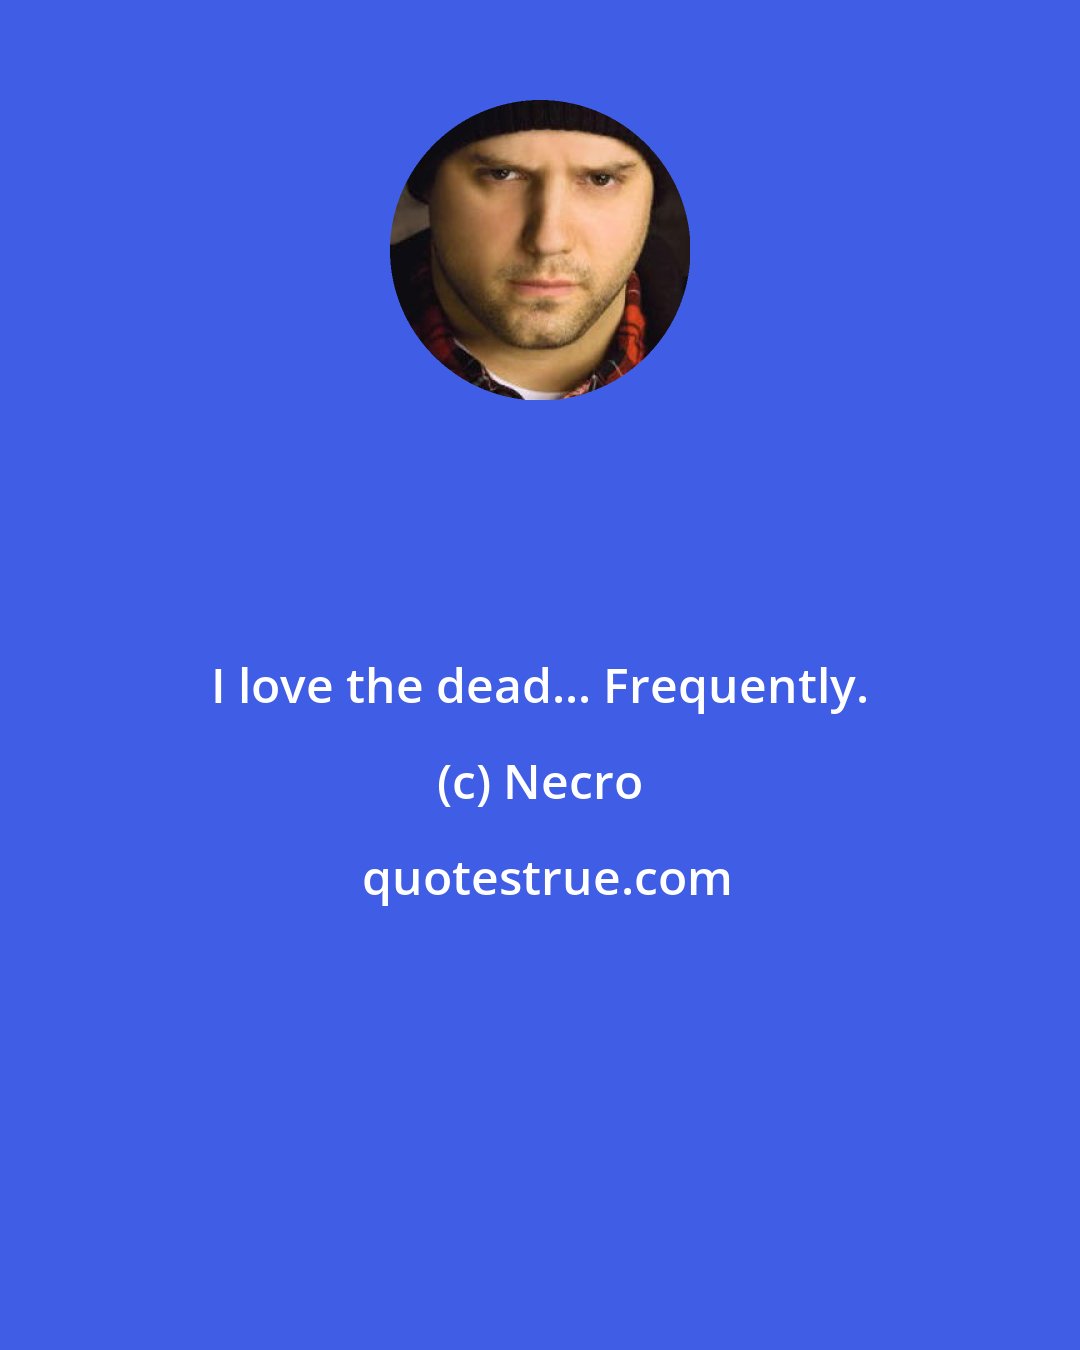 Necro: I love the dead... Frequently.